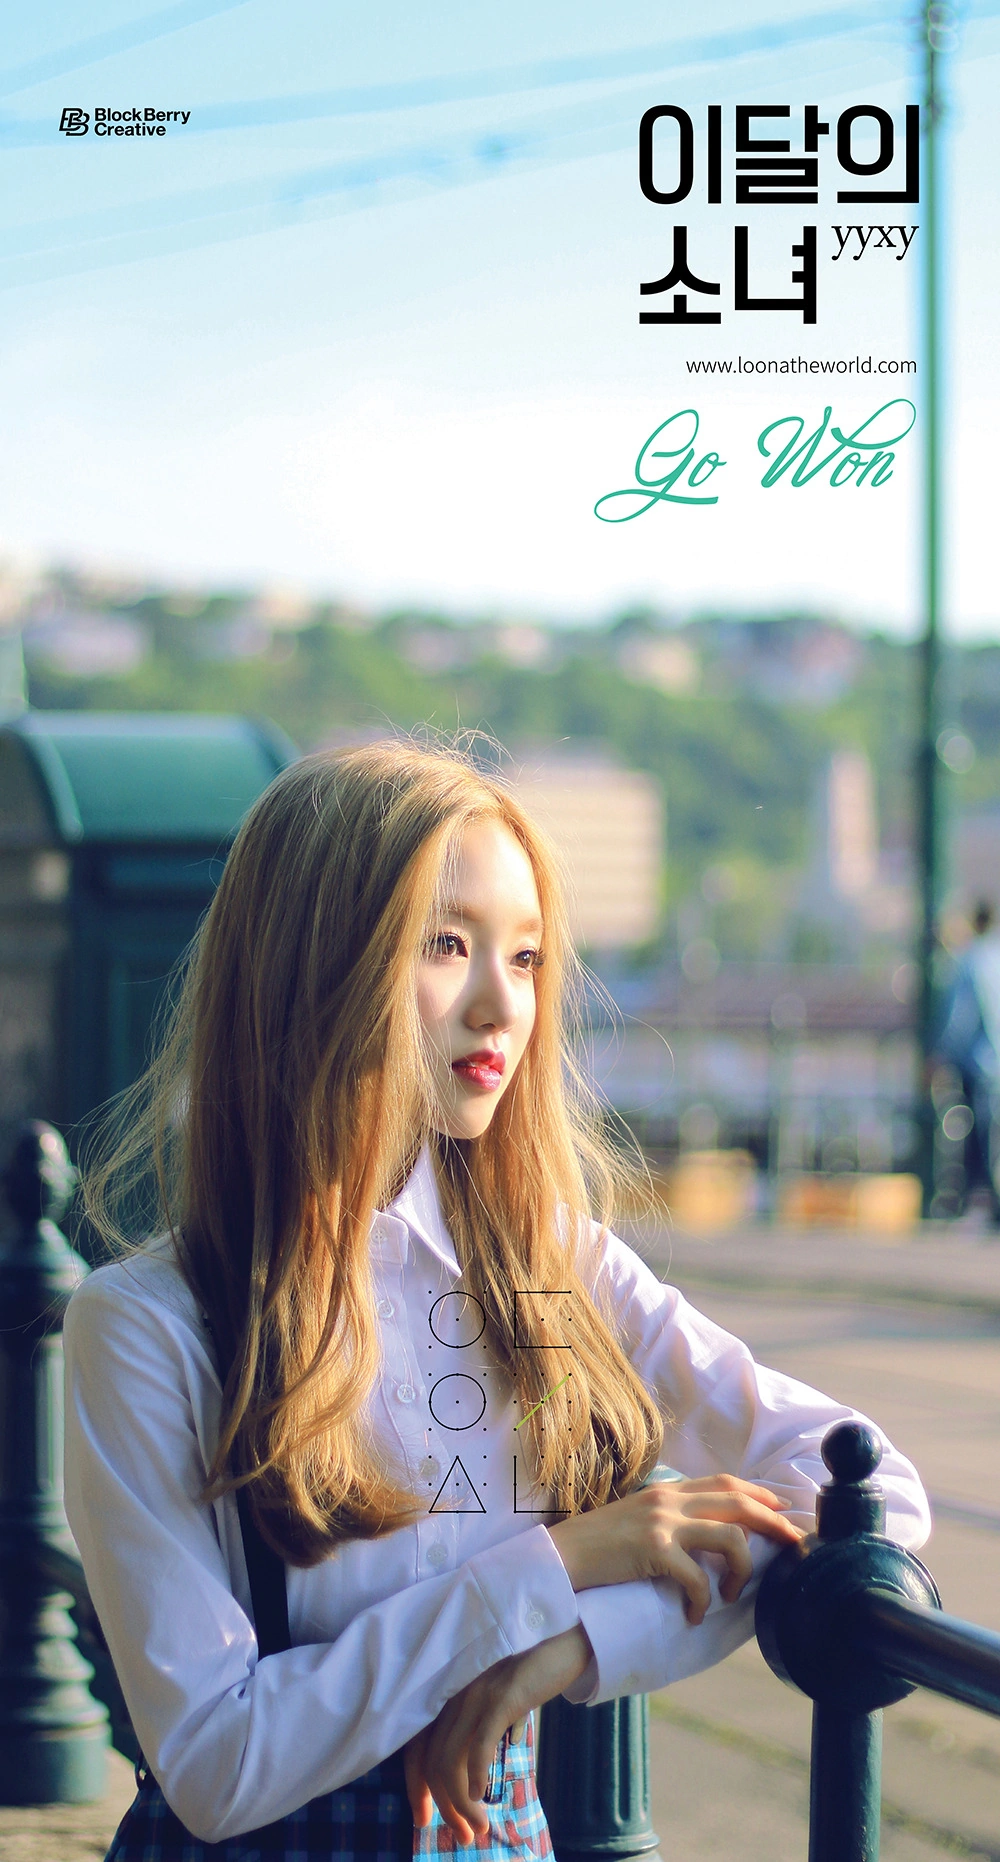 Loona yyxy Beauty & the Beat Gowon Concept Teaser Picture Image Photo Kpop K-Concept 2